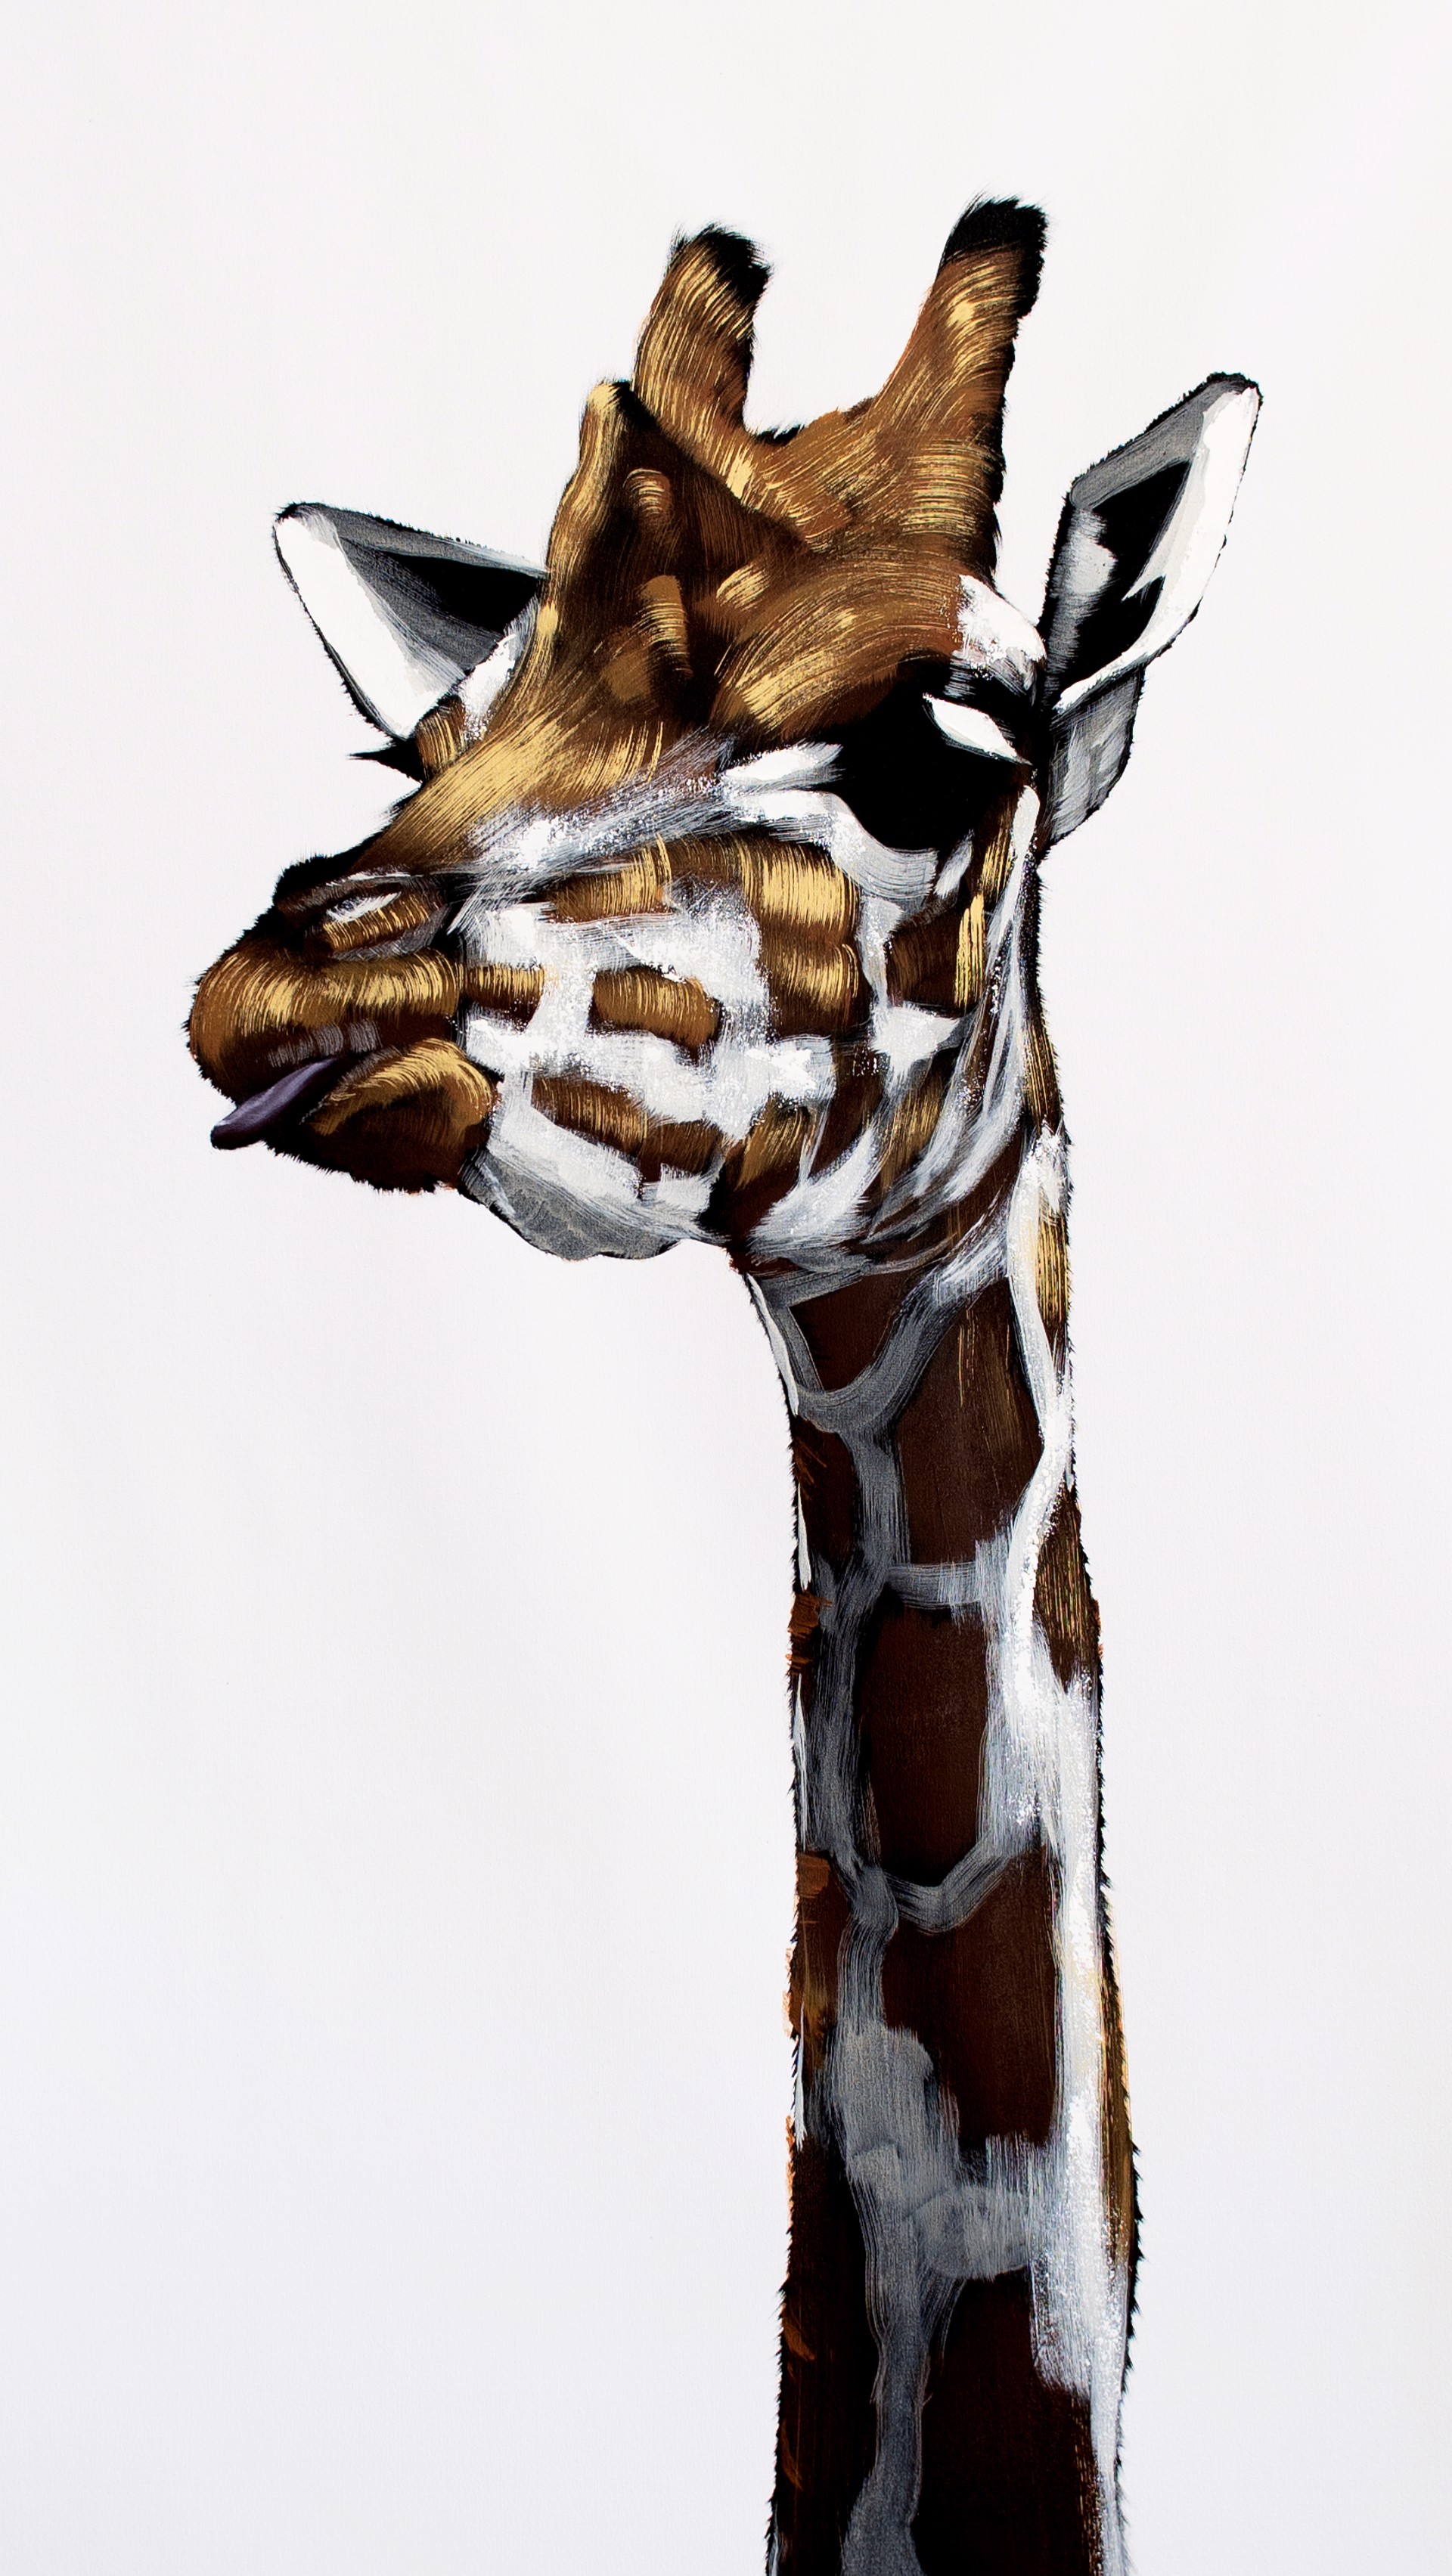 Giraffe Tongue Out on White by Josh Brown